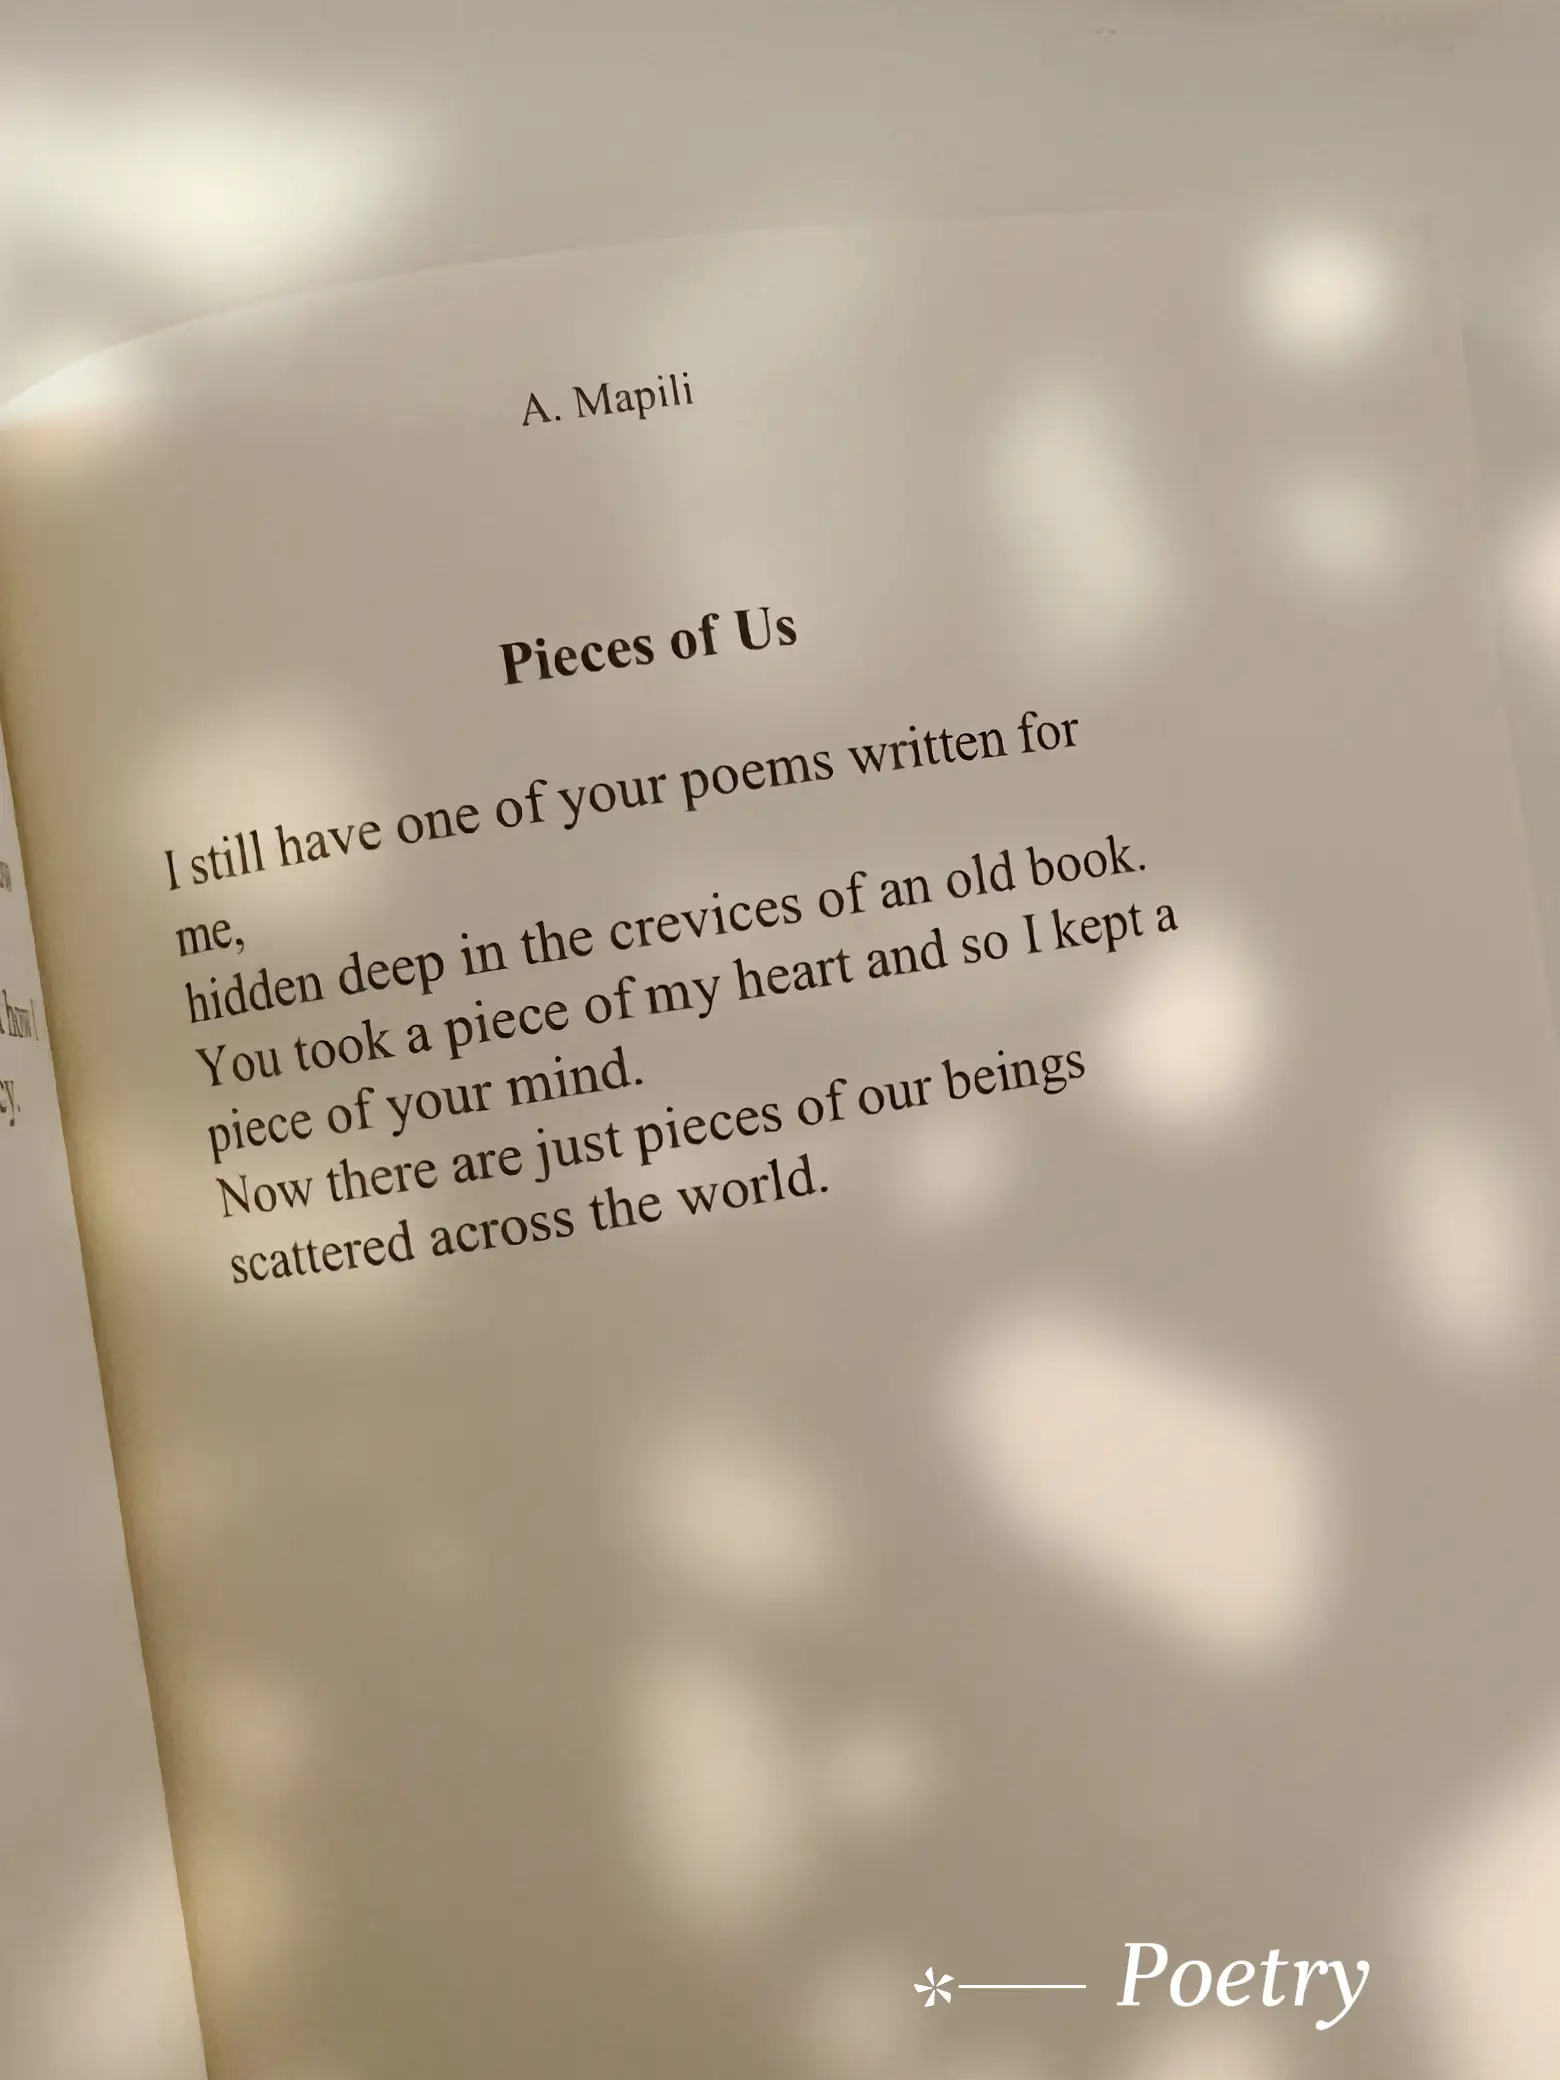 About — Pieces of Us